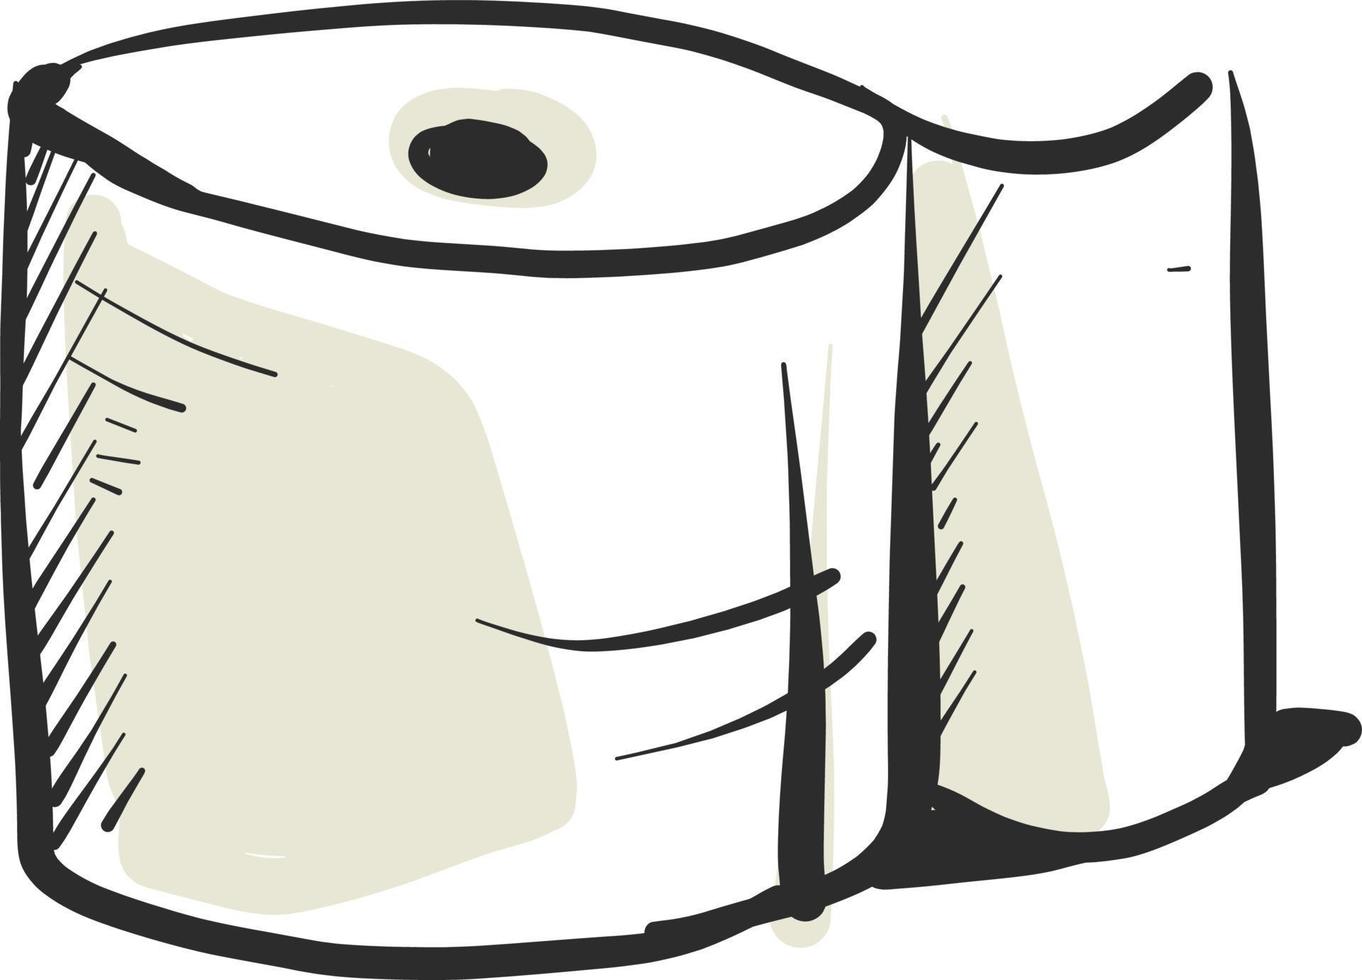 Toilet paper drawing, illustration, vector on white background.